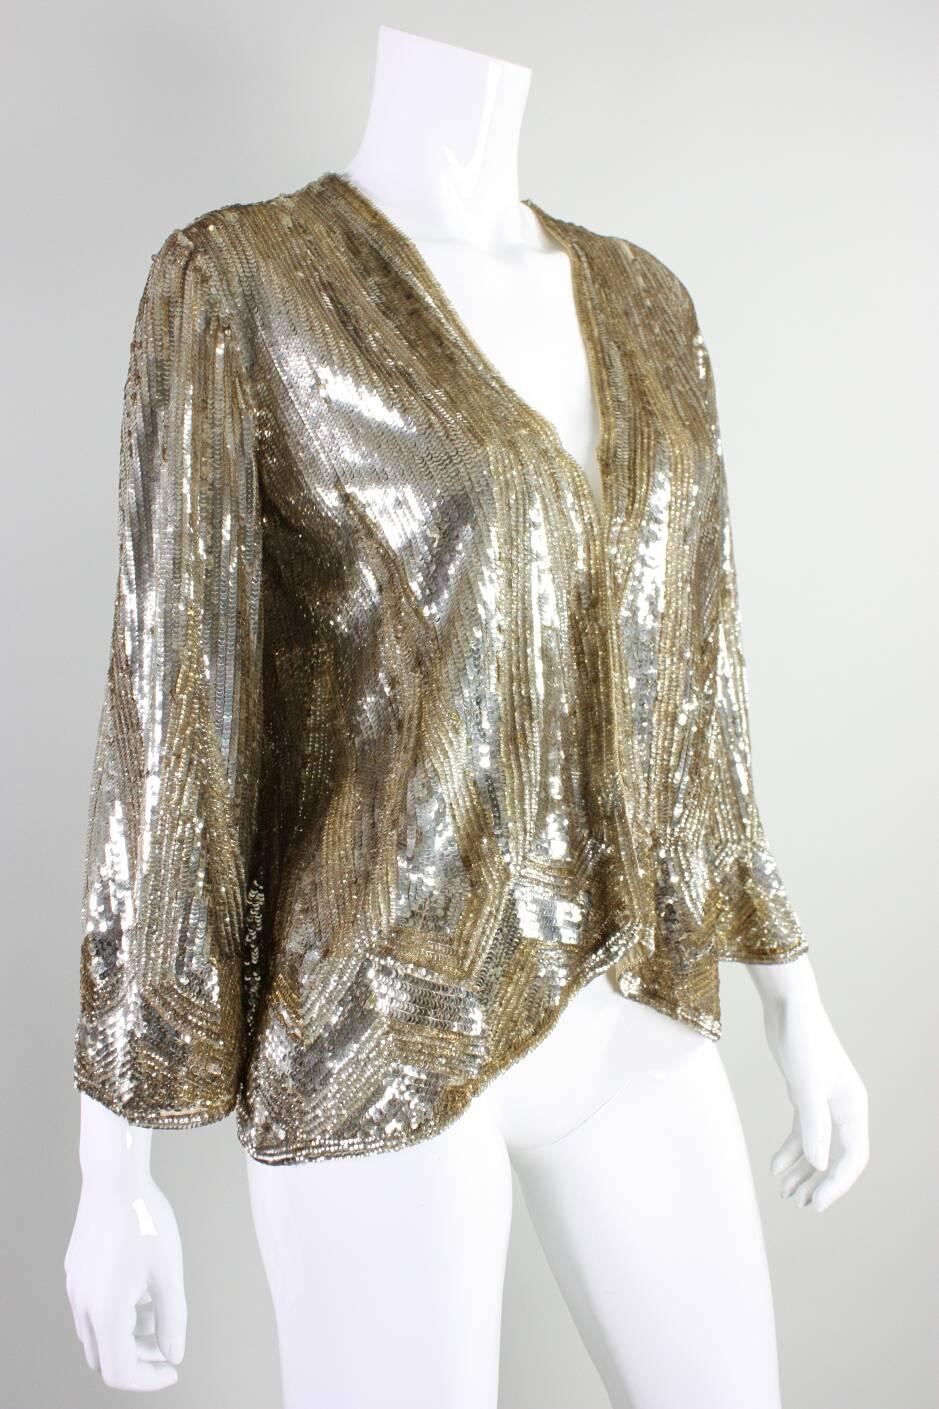 Vintage jacket is made of beige netting that is fully covered in gold celluloid sequins that are arranged in a geometric Art Deco pattern. Tag identifies the piece as being 